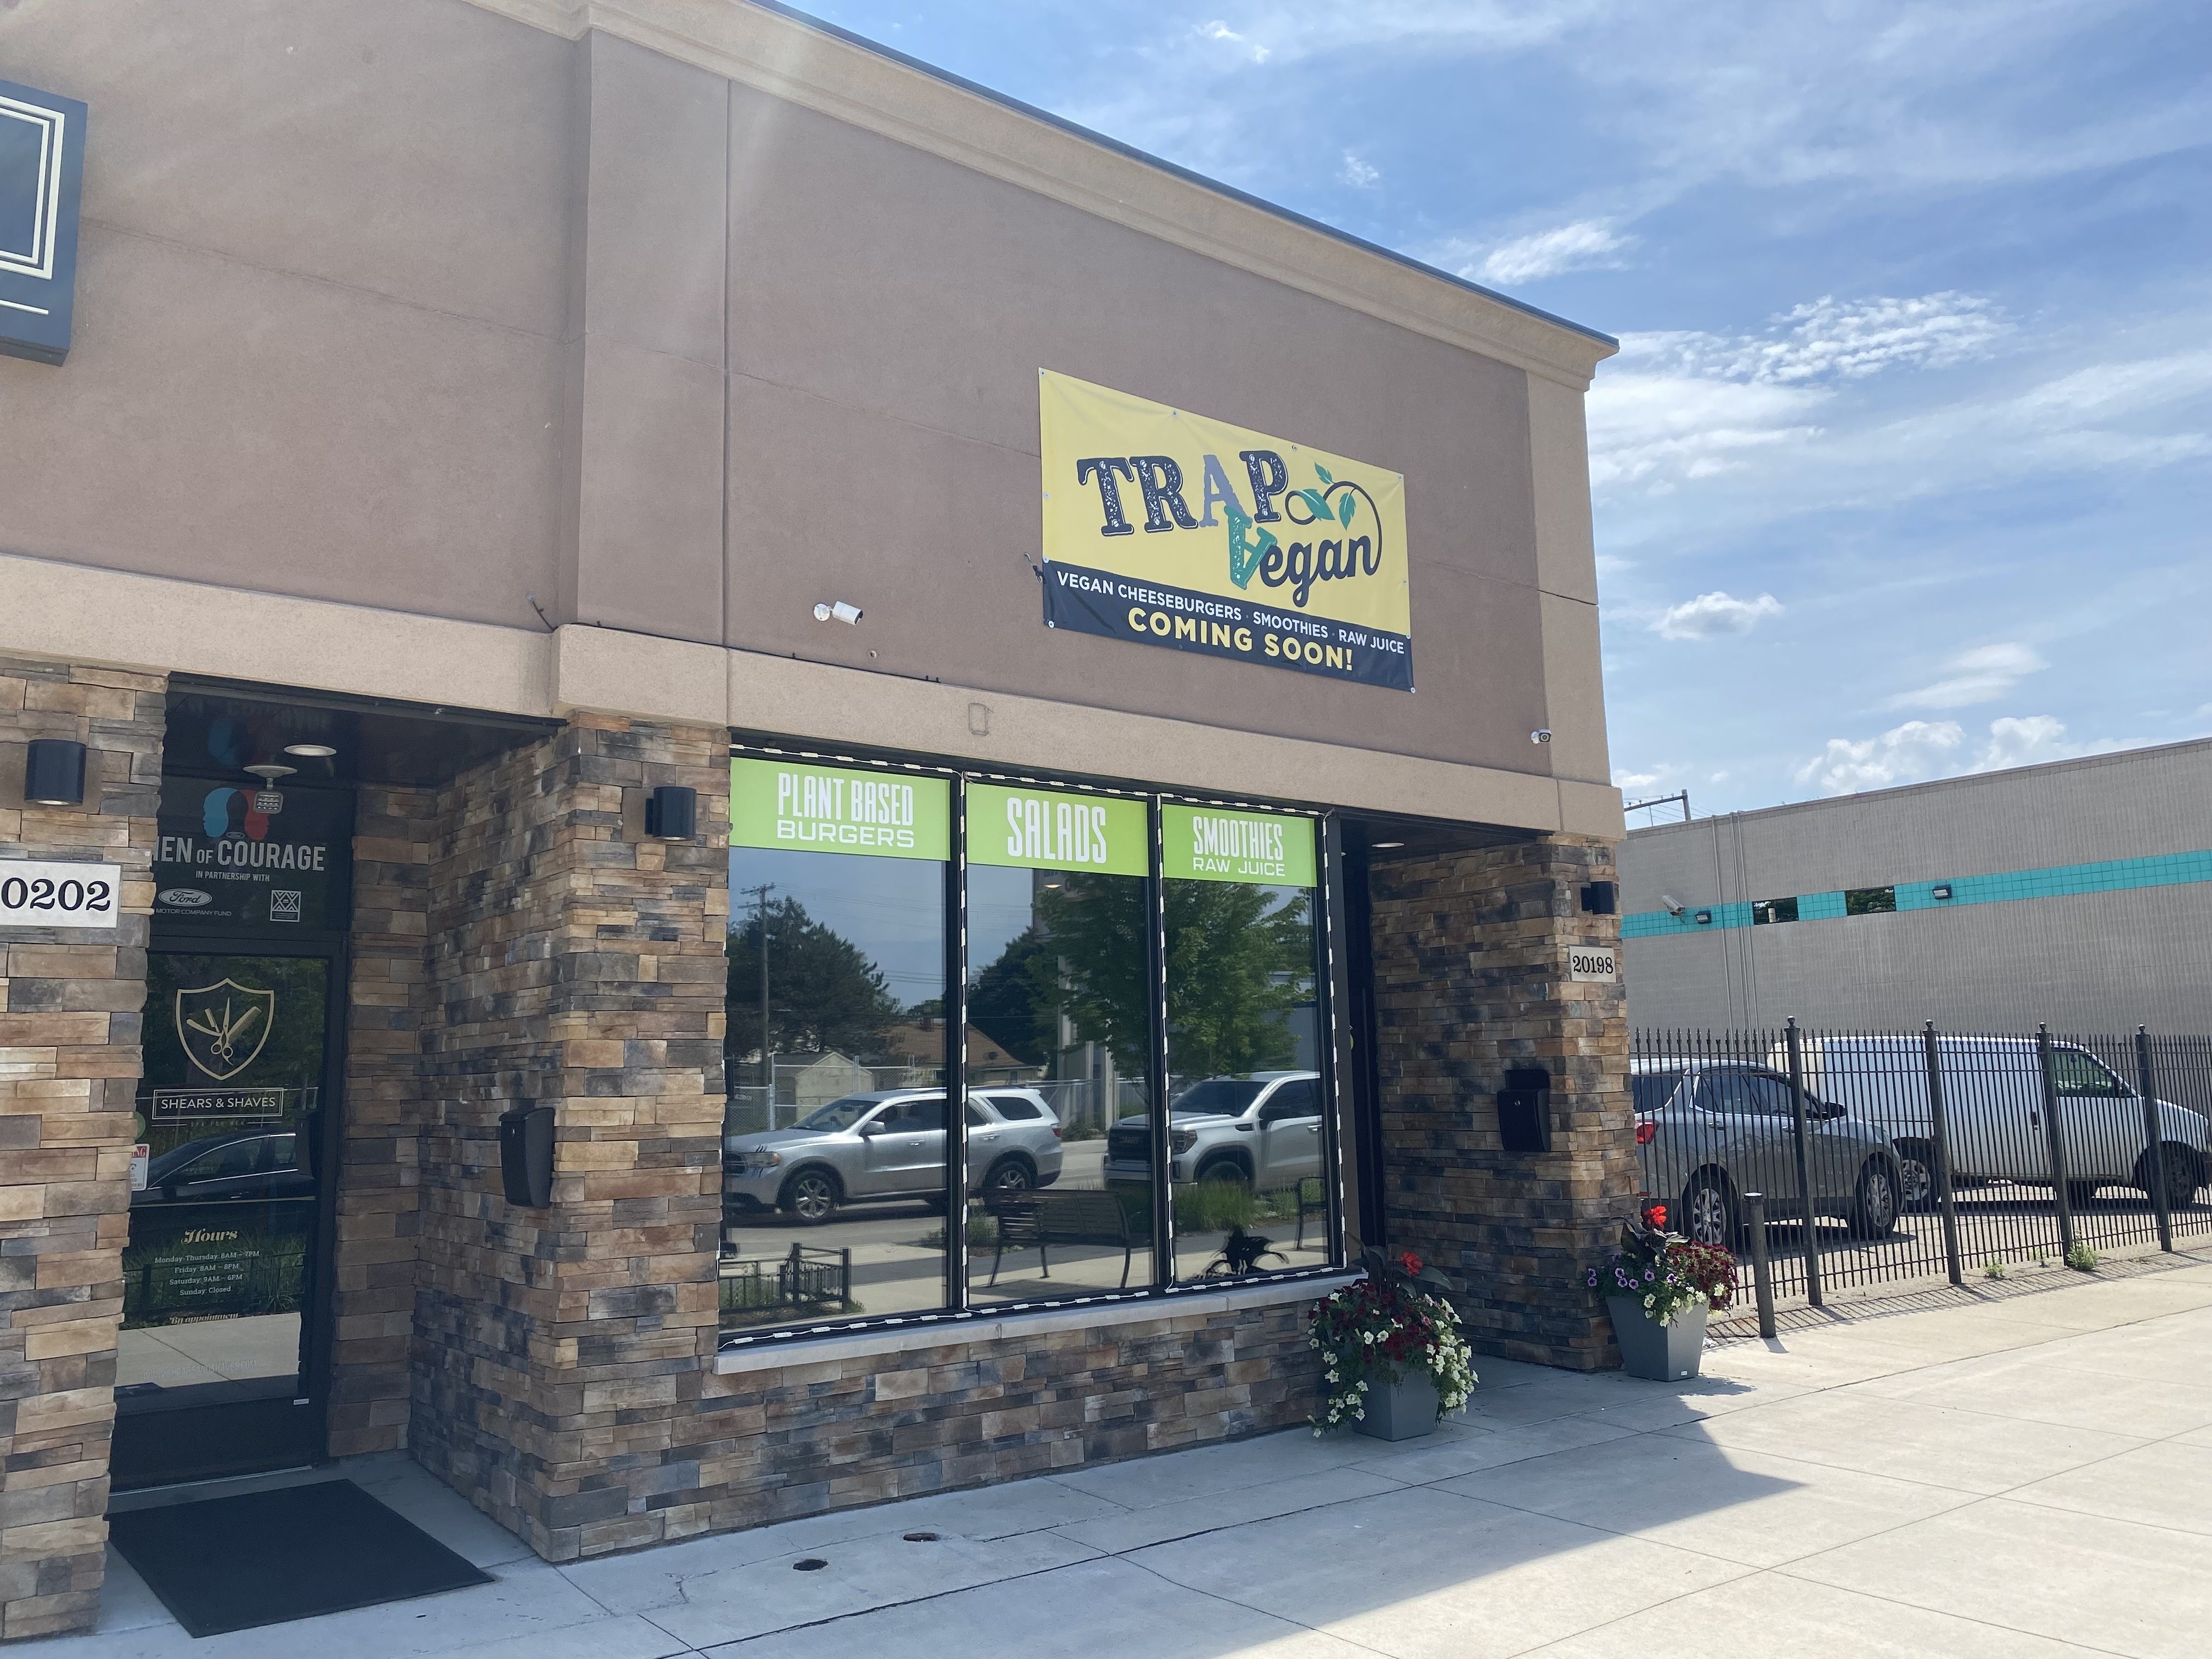 The Trap Vegan storefront in a strip mall